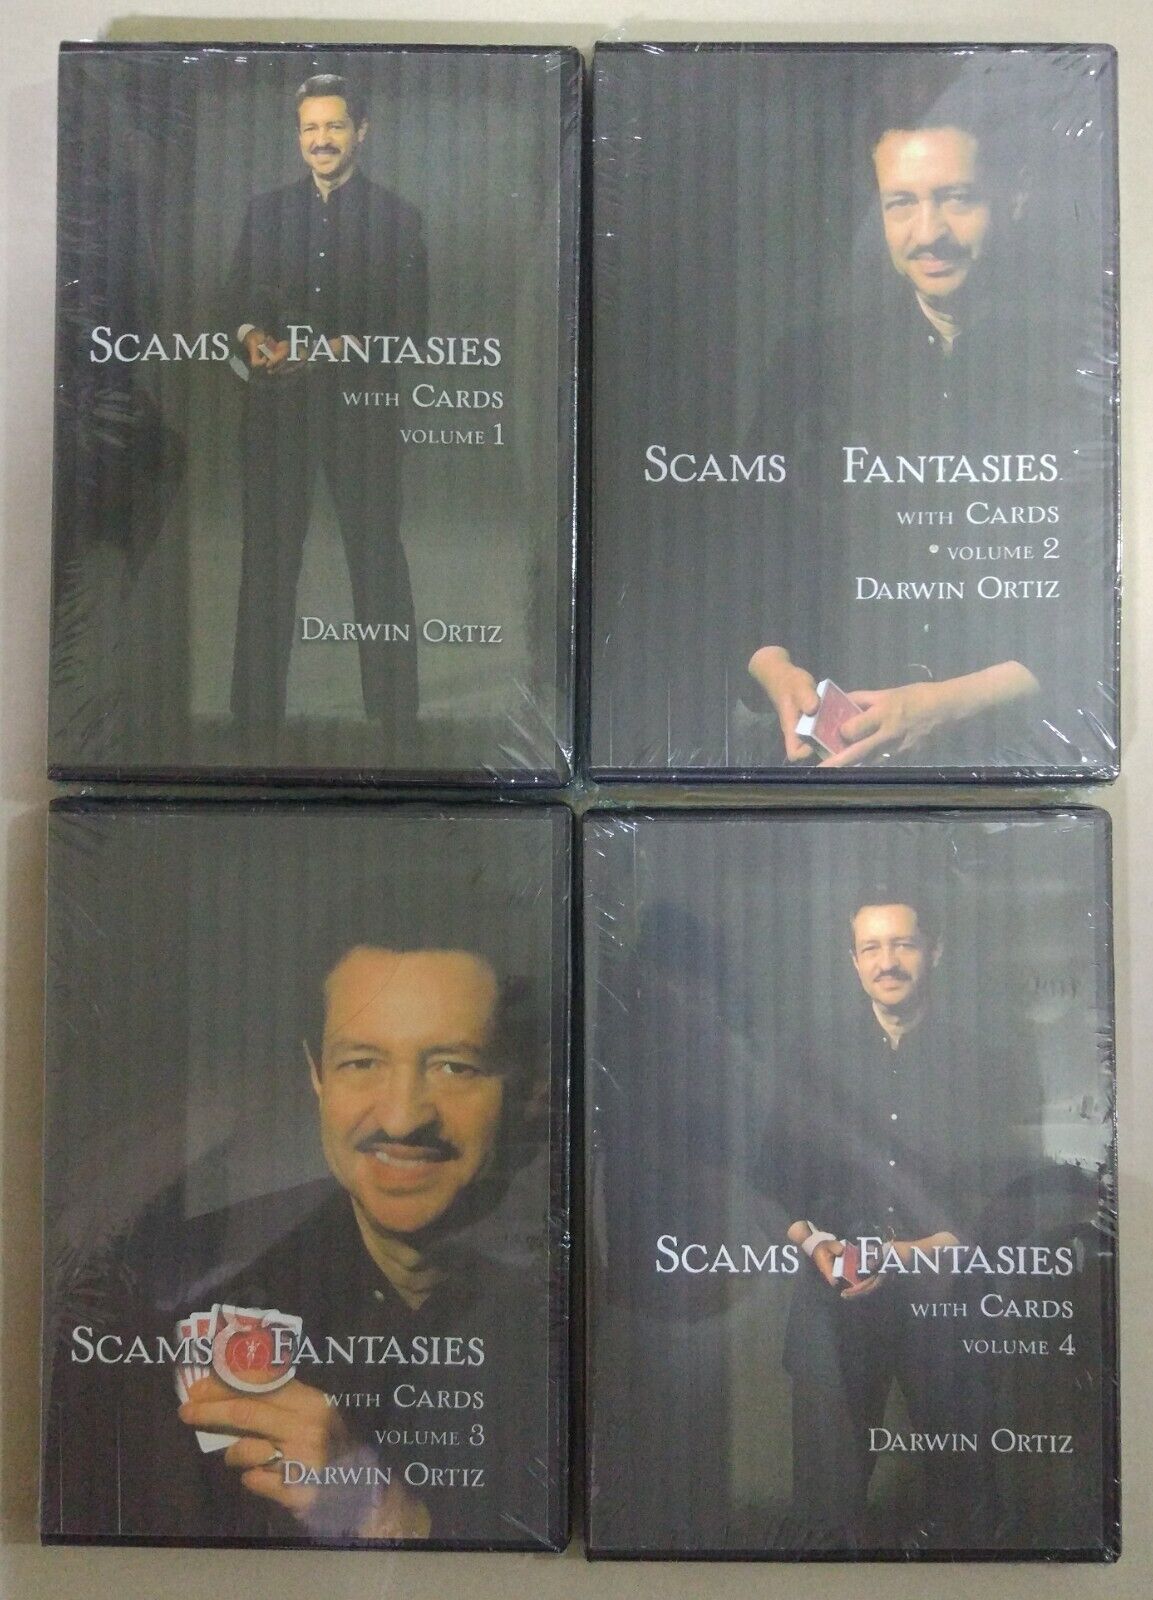 Factory Sealed 4 DVD - Darwin Ortiz - Scams and Fantasies With Cards Complete